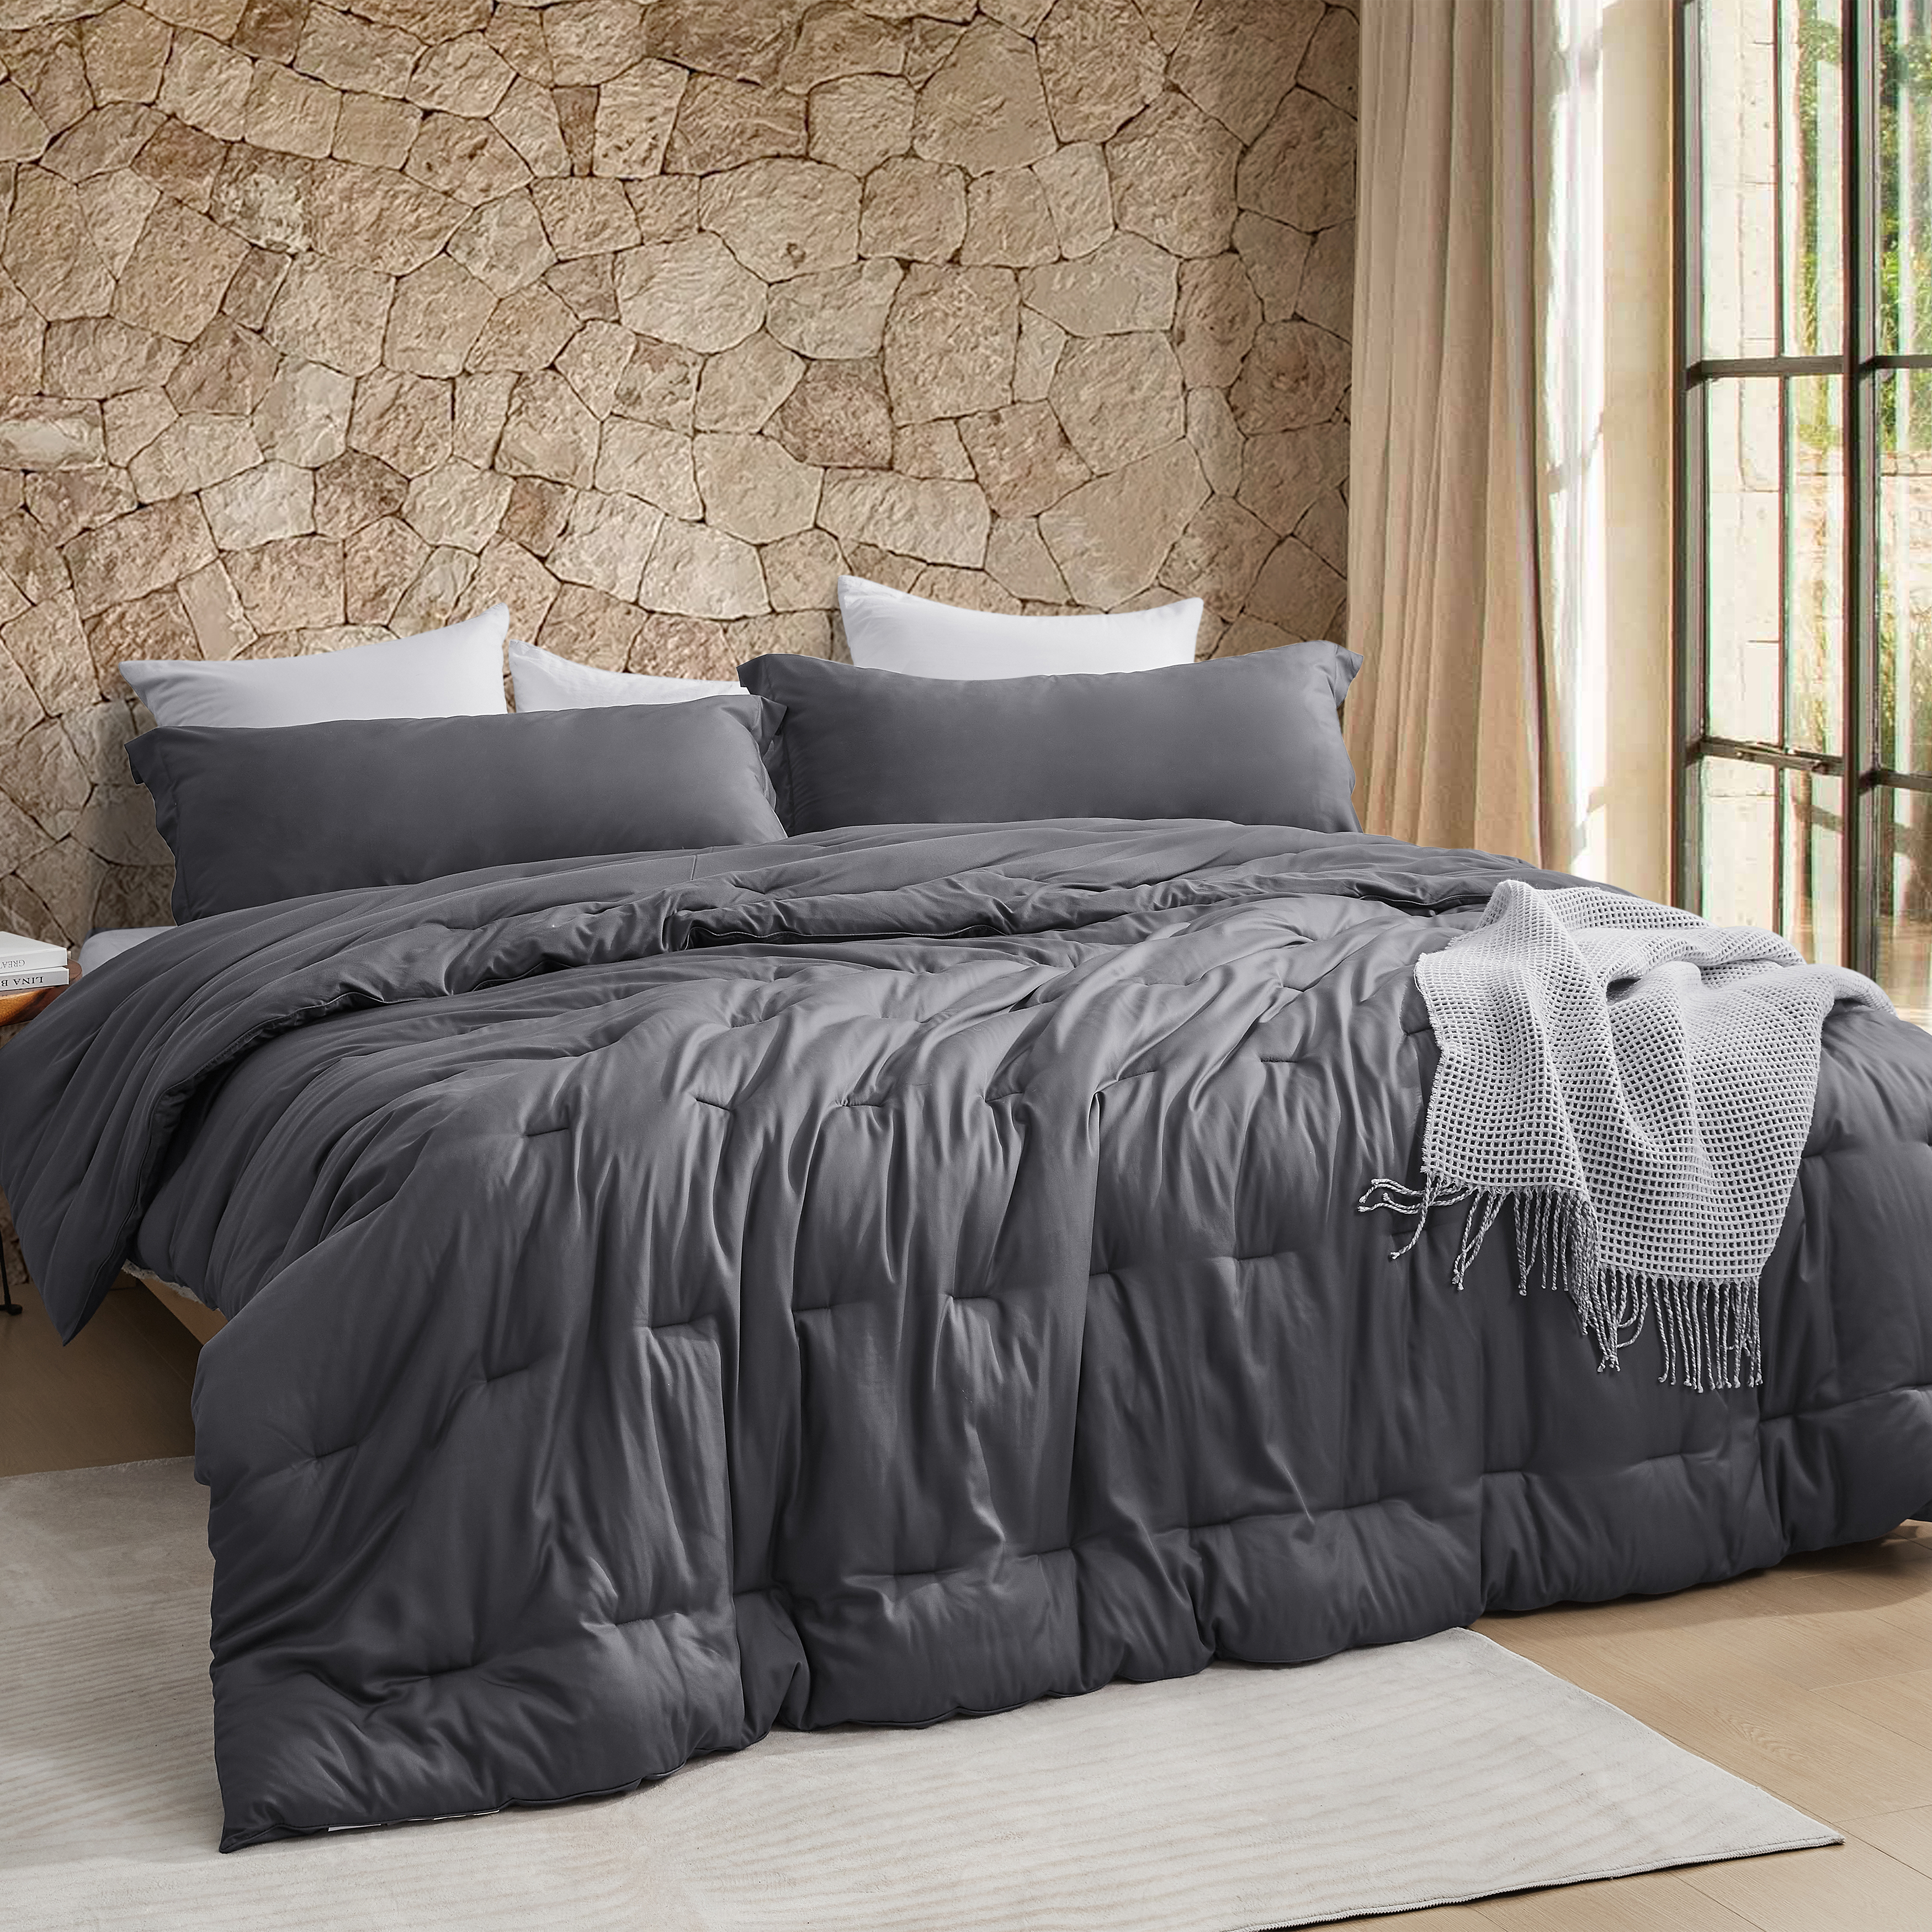 Bamboo Butter - Coma Inducer Oversized King Cooling Comforter - Peppercorn Gray